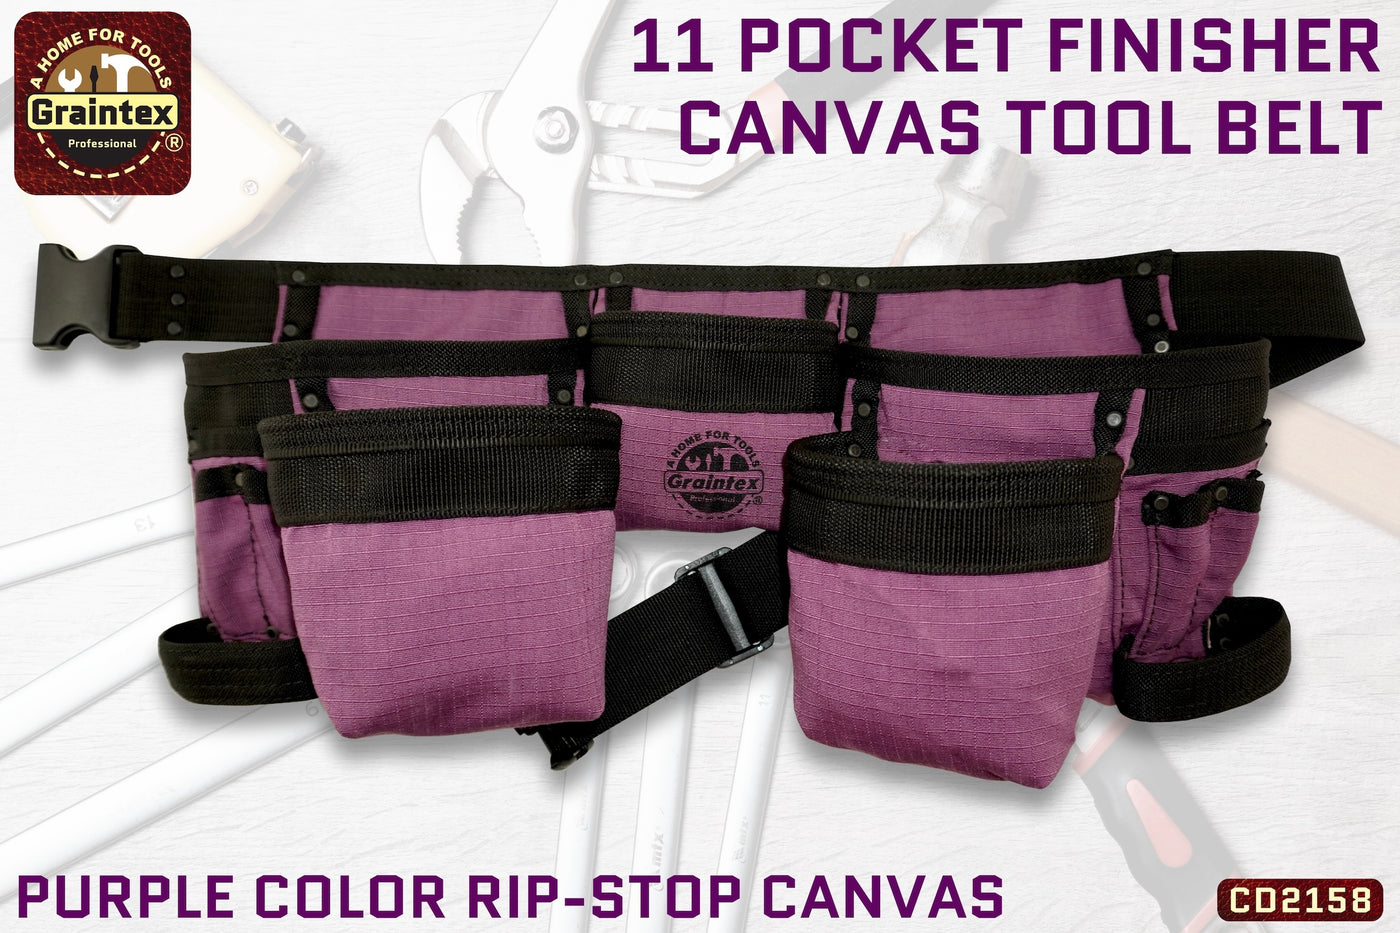 CD2158 :: 11 POCKET FINISHER CANVS TOOL BELT PURPLE COLOR RIP-STOP CANVAS